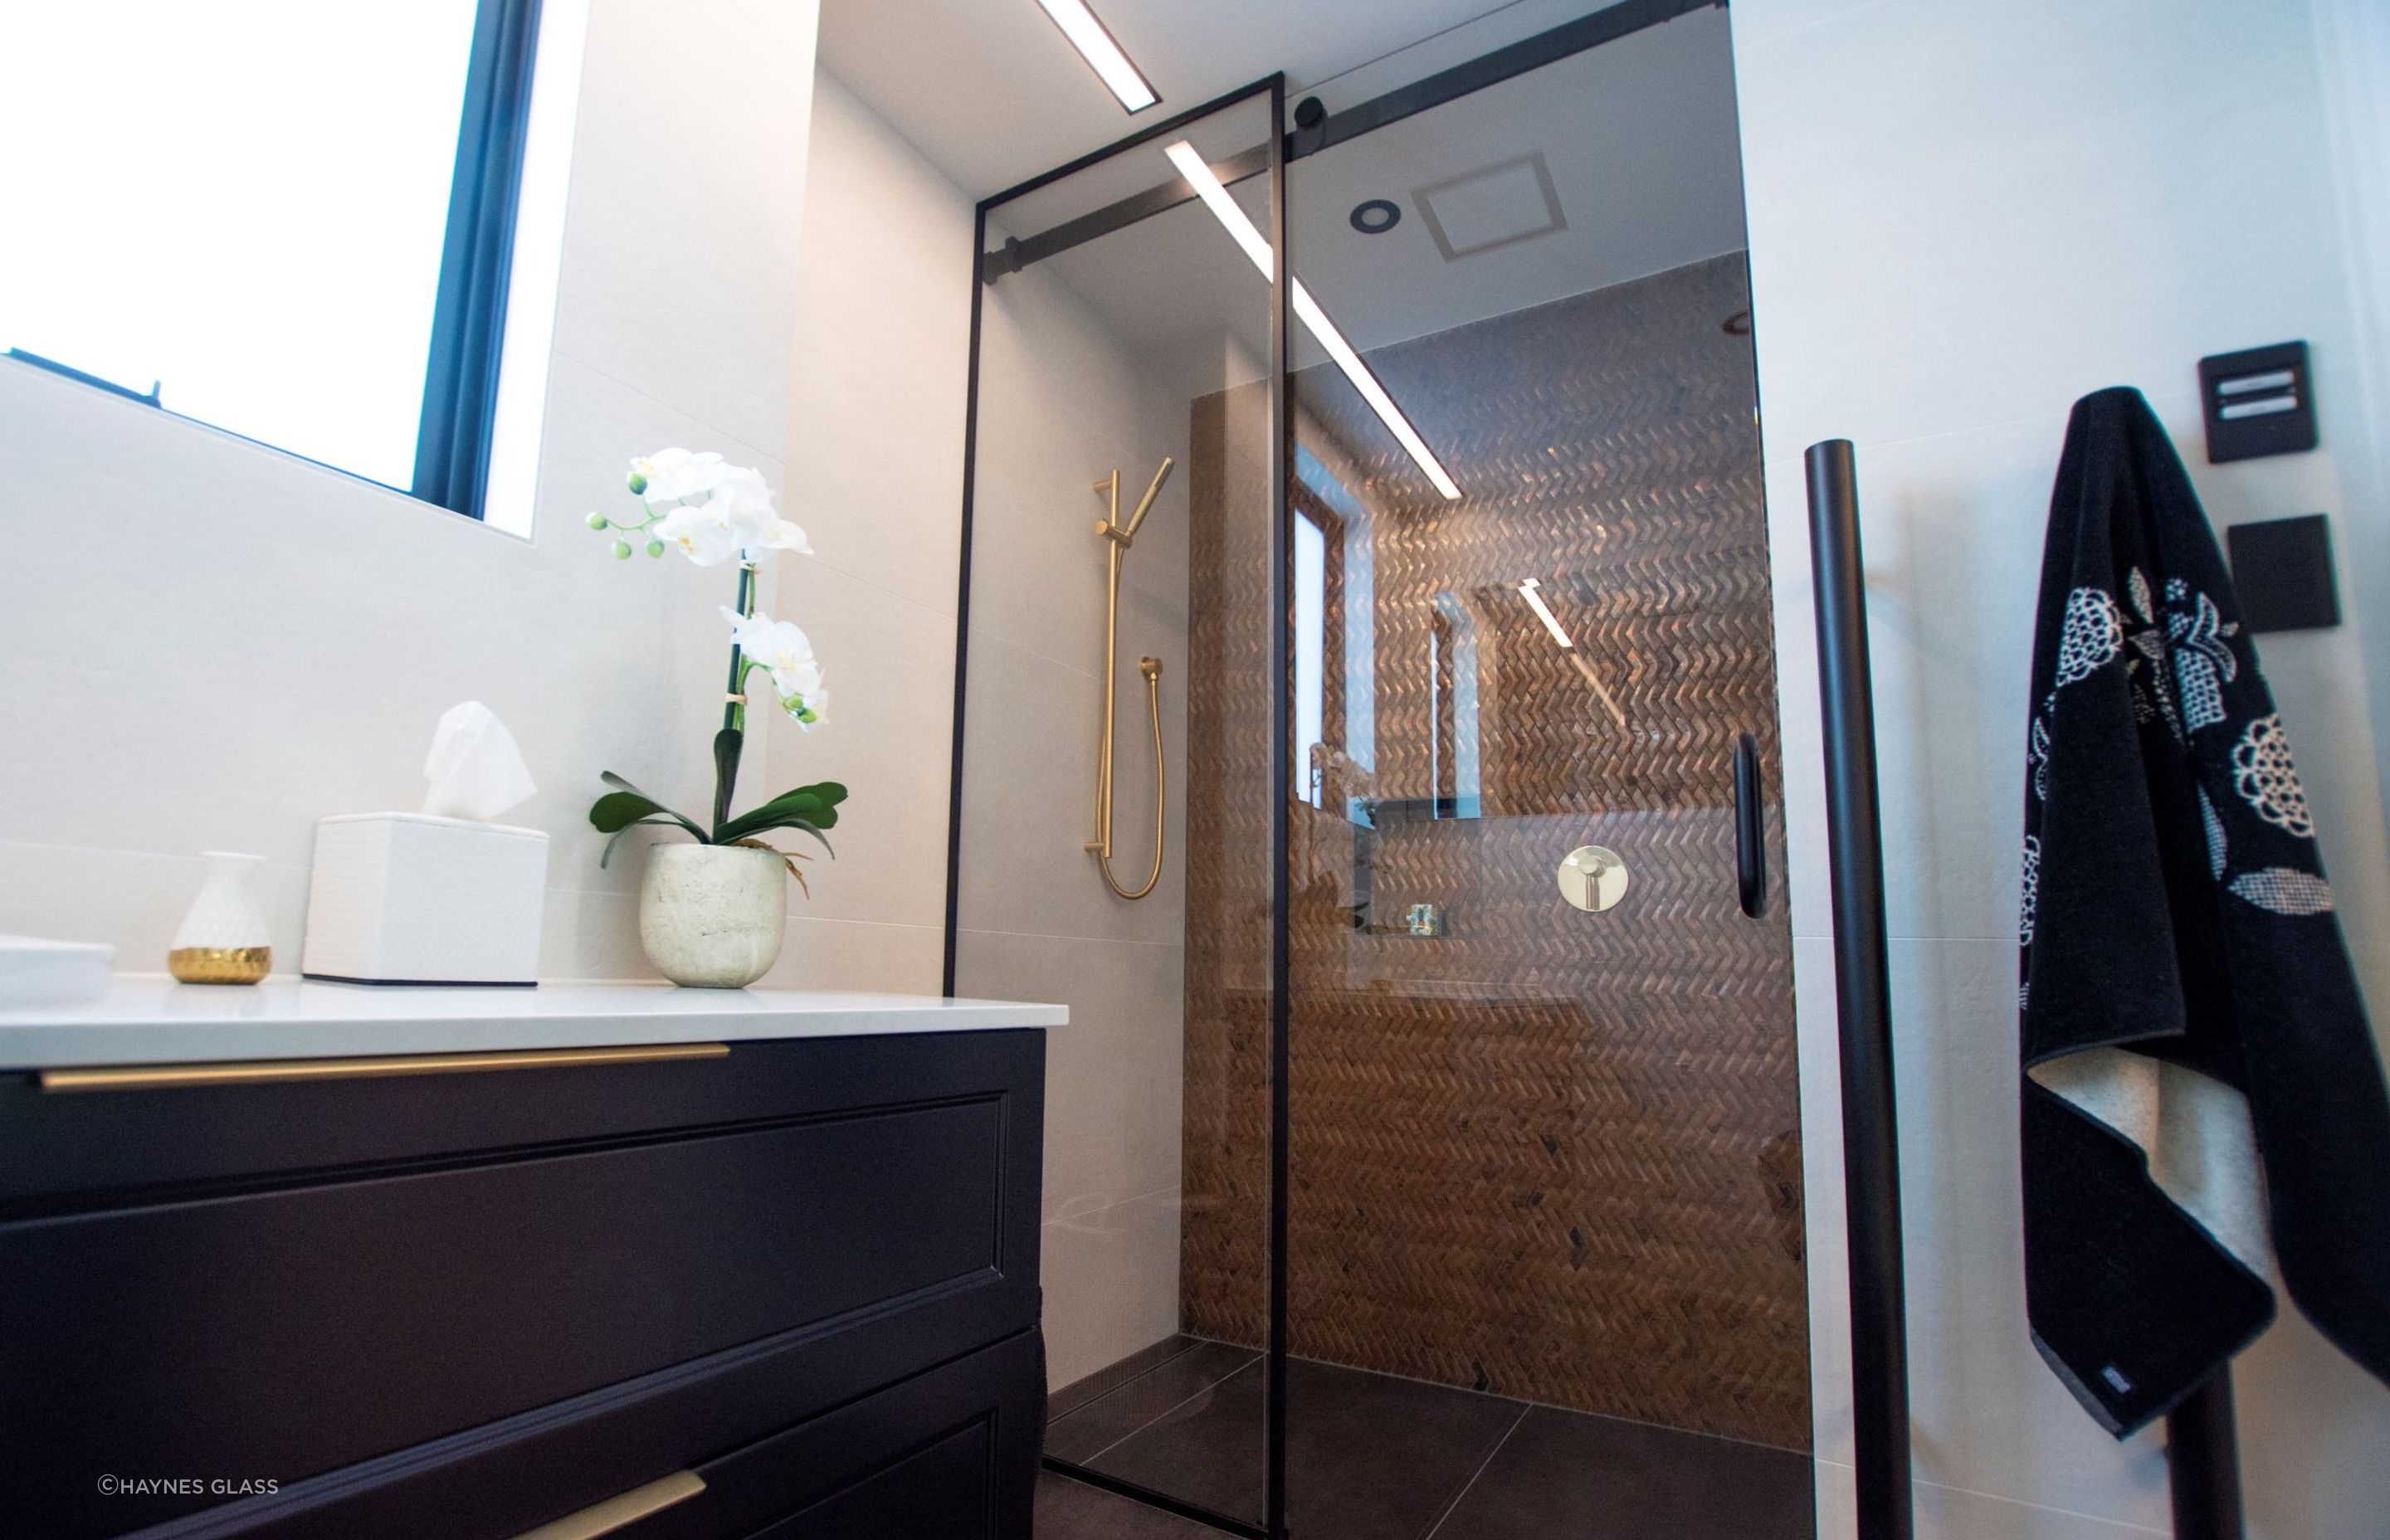 Sliding doors are great space savers and can be used as the entry door to your bathroom or for your shower as seen here.